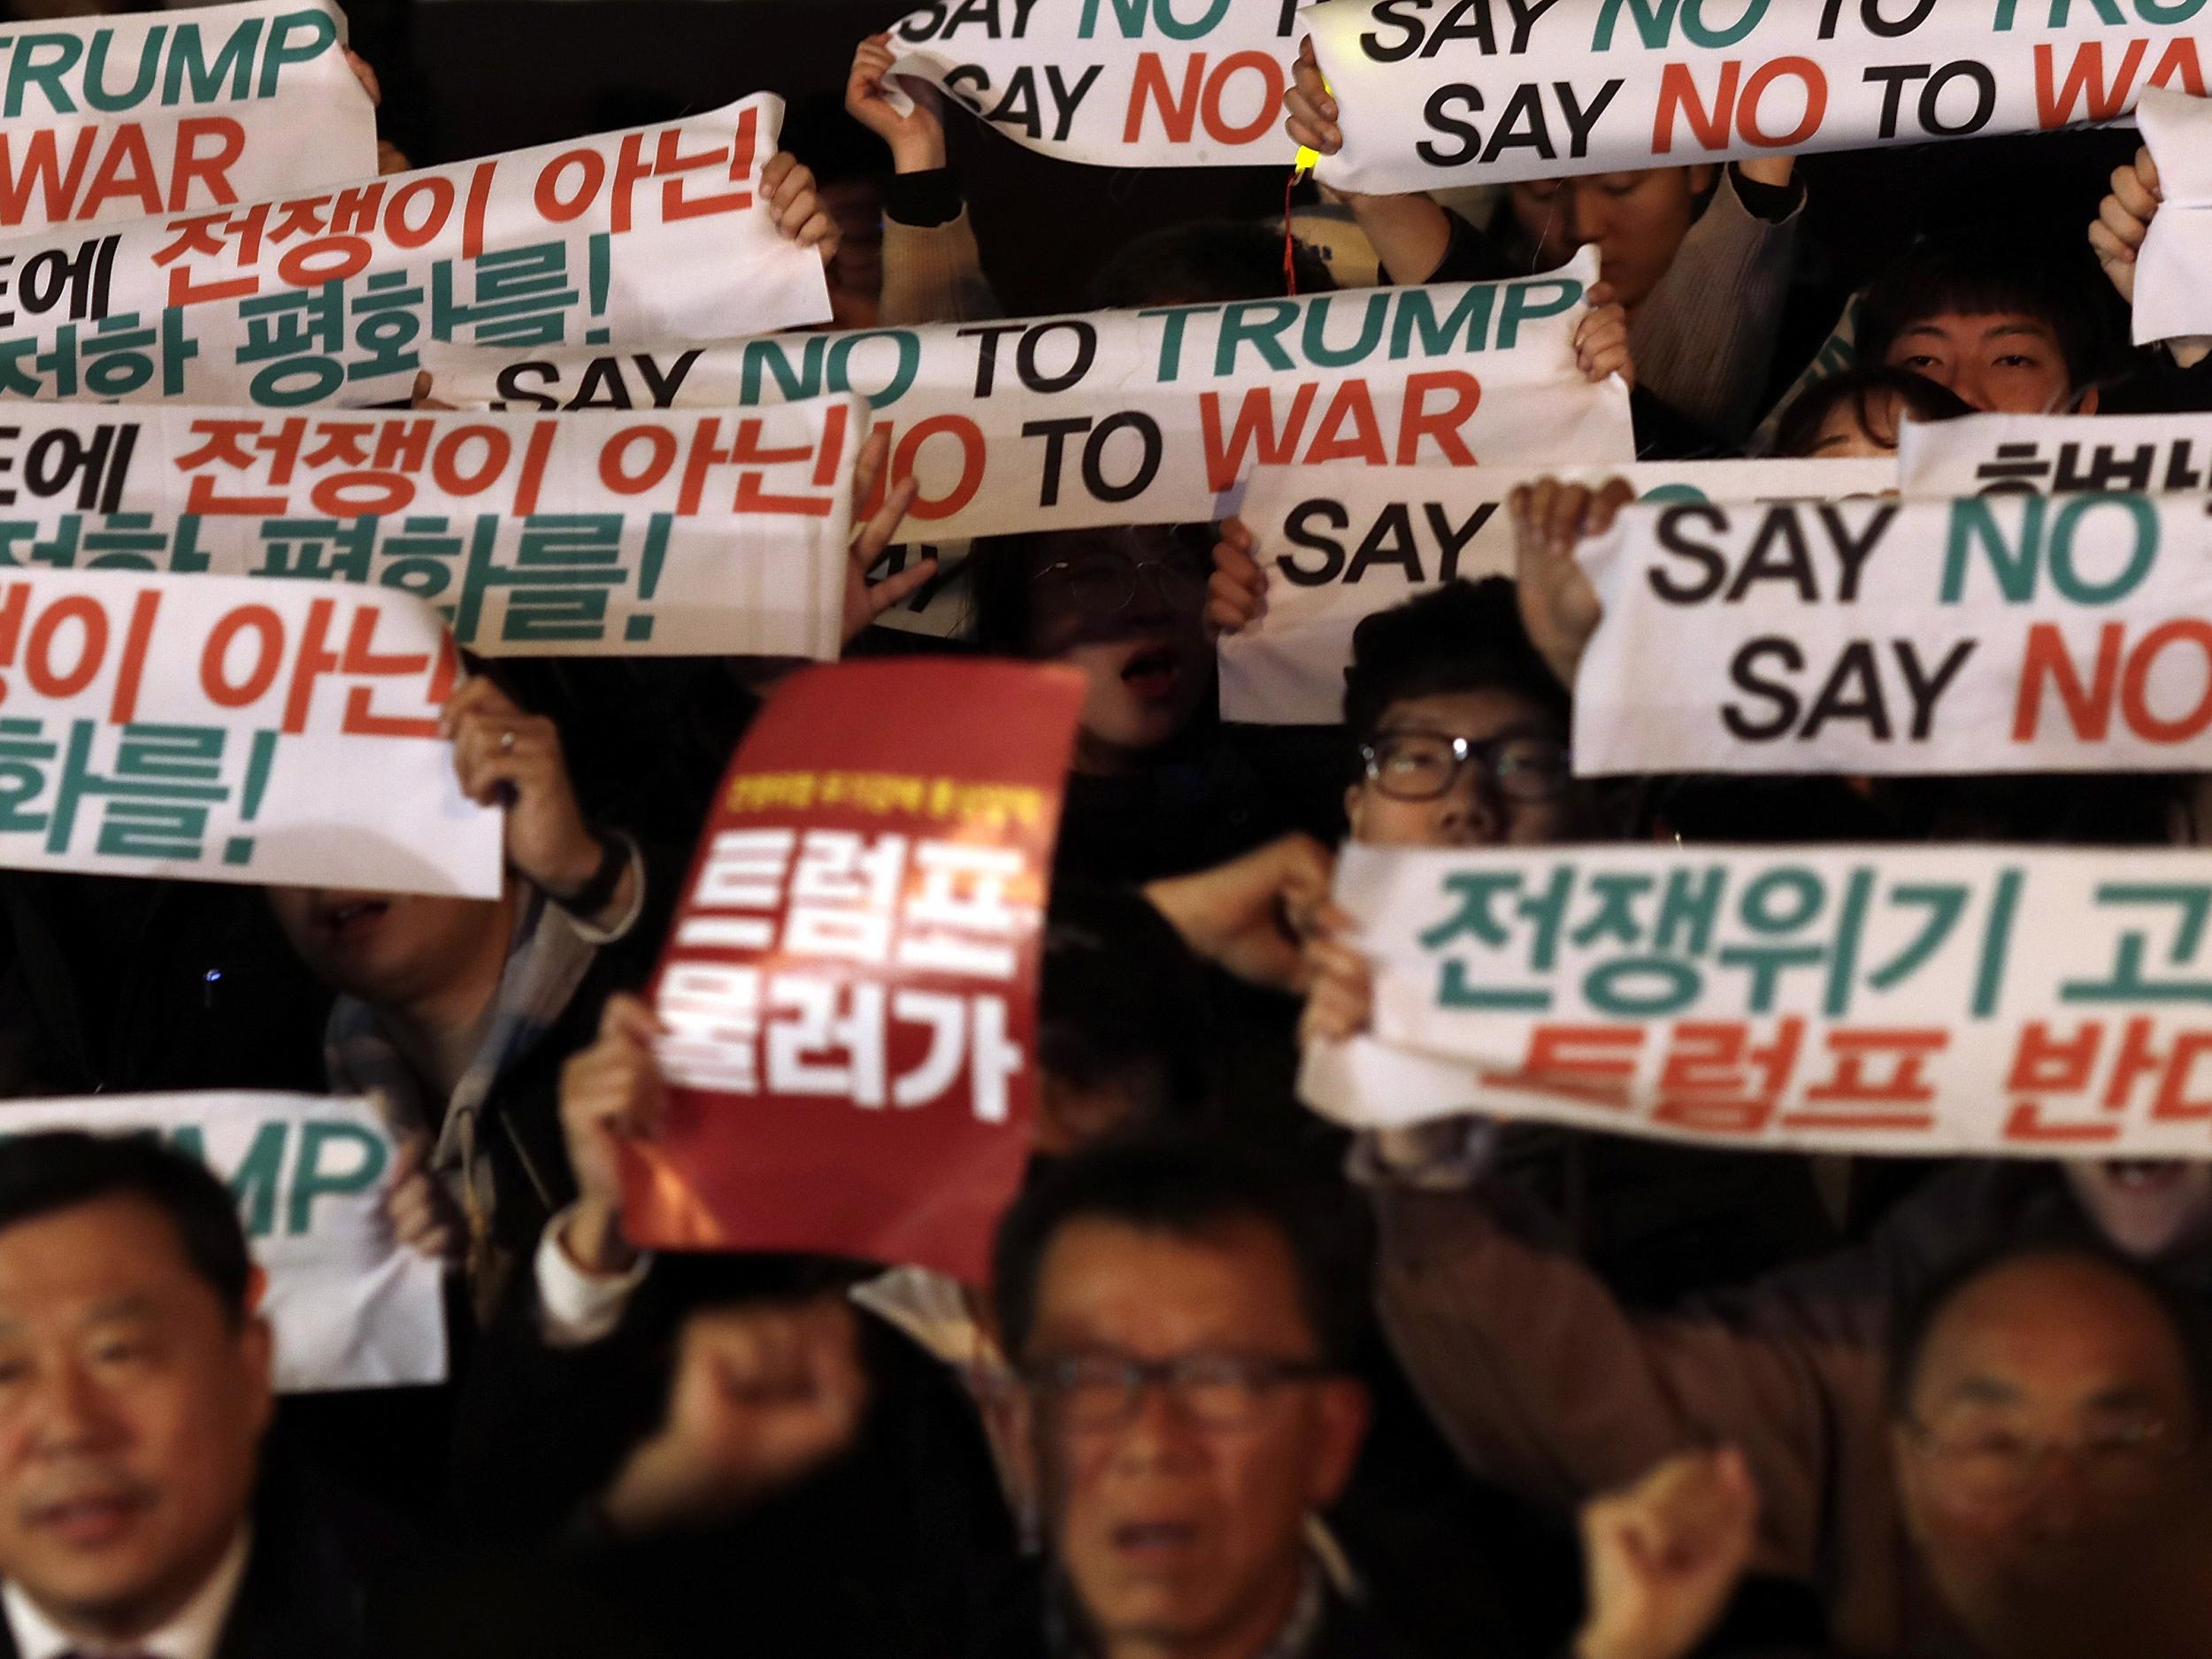 Protesters take part in an anti-Trump rally in front of the US Embassy in Seoul today